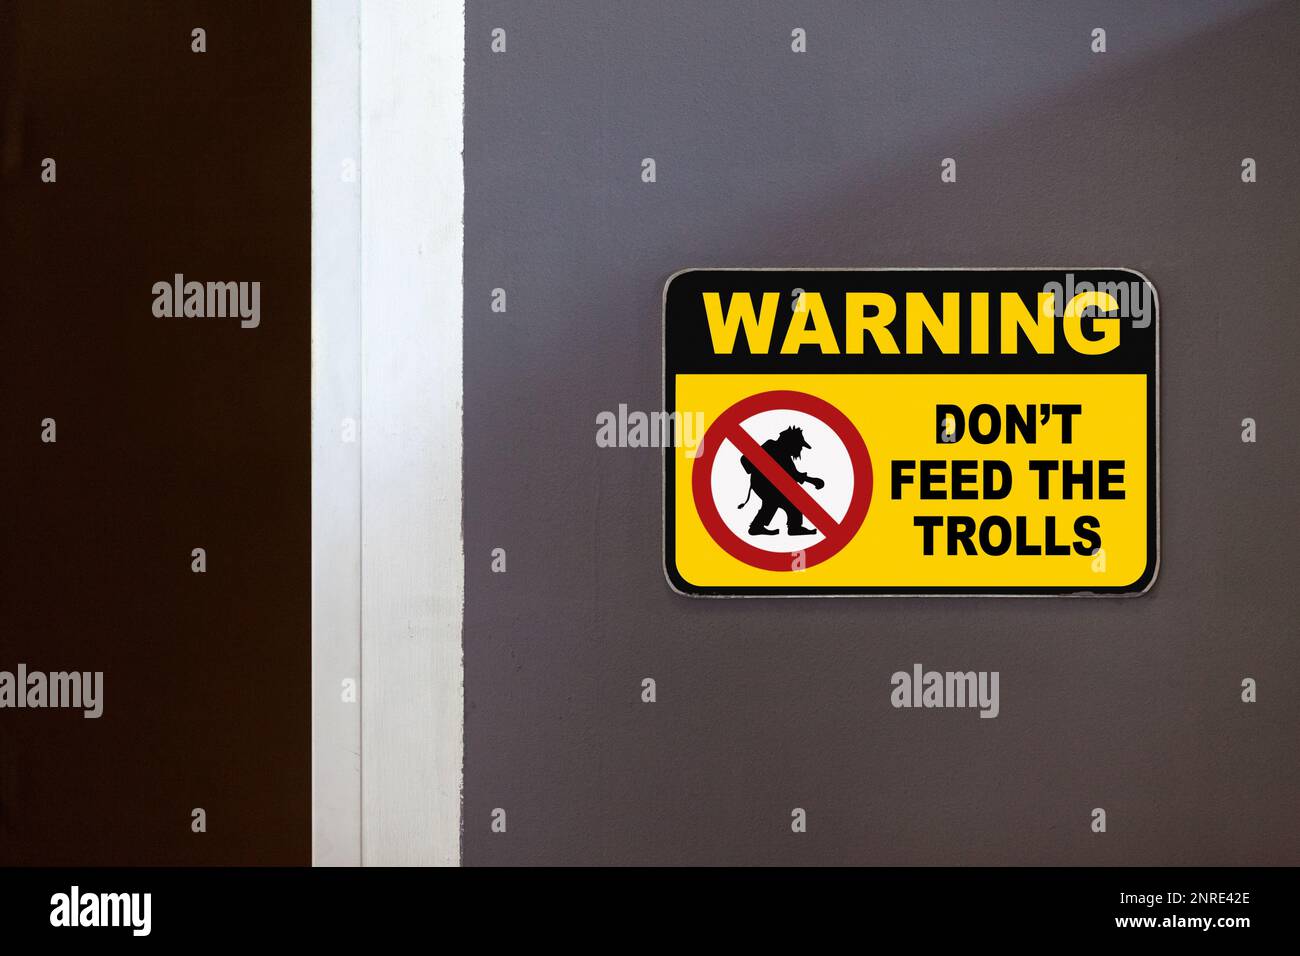 Yellow and black warning sign on the side of an open door stating in 'Warning - Don't feed the Trolls'. Stock Photo